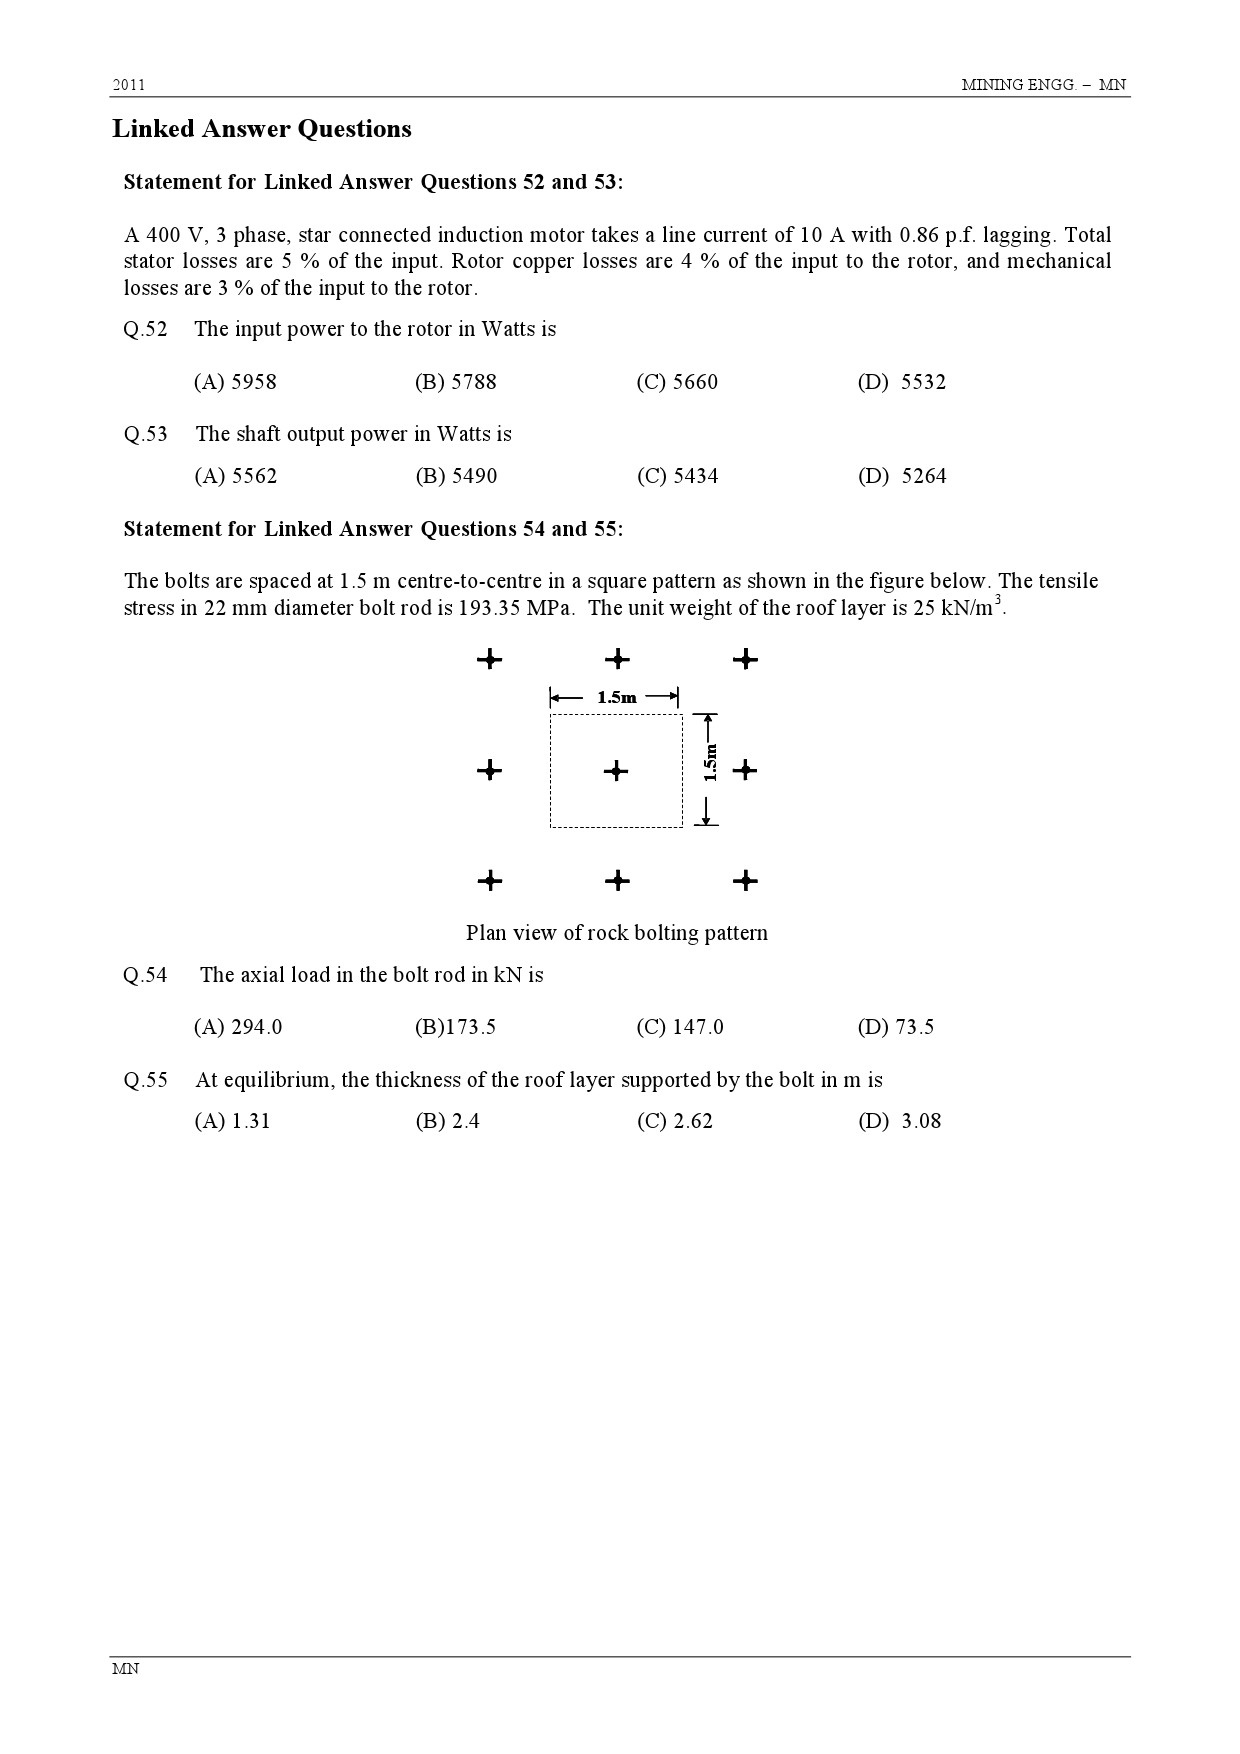 GATE Exam Question Paper 2011 Mining Engineering 10